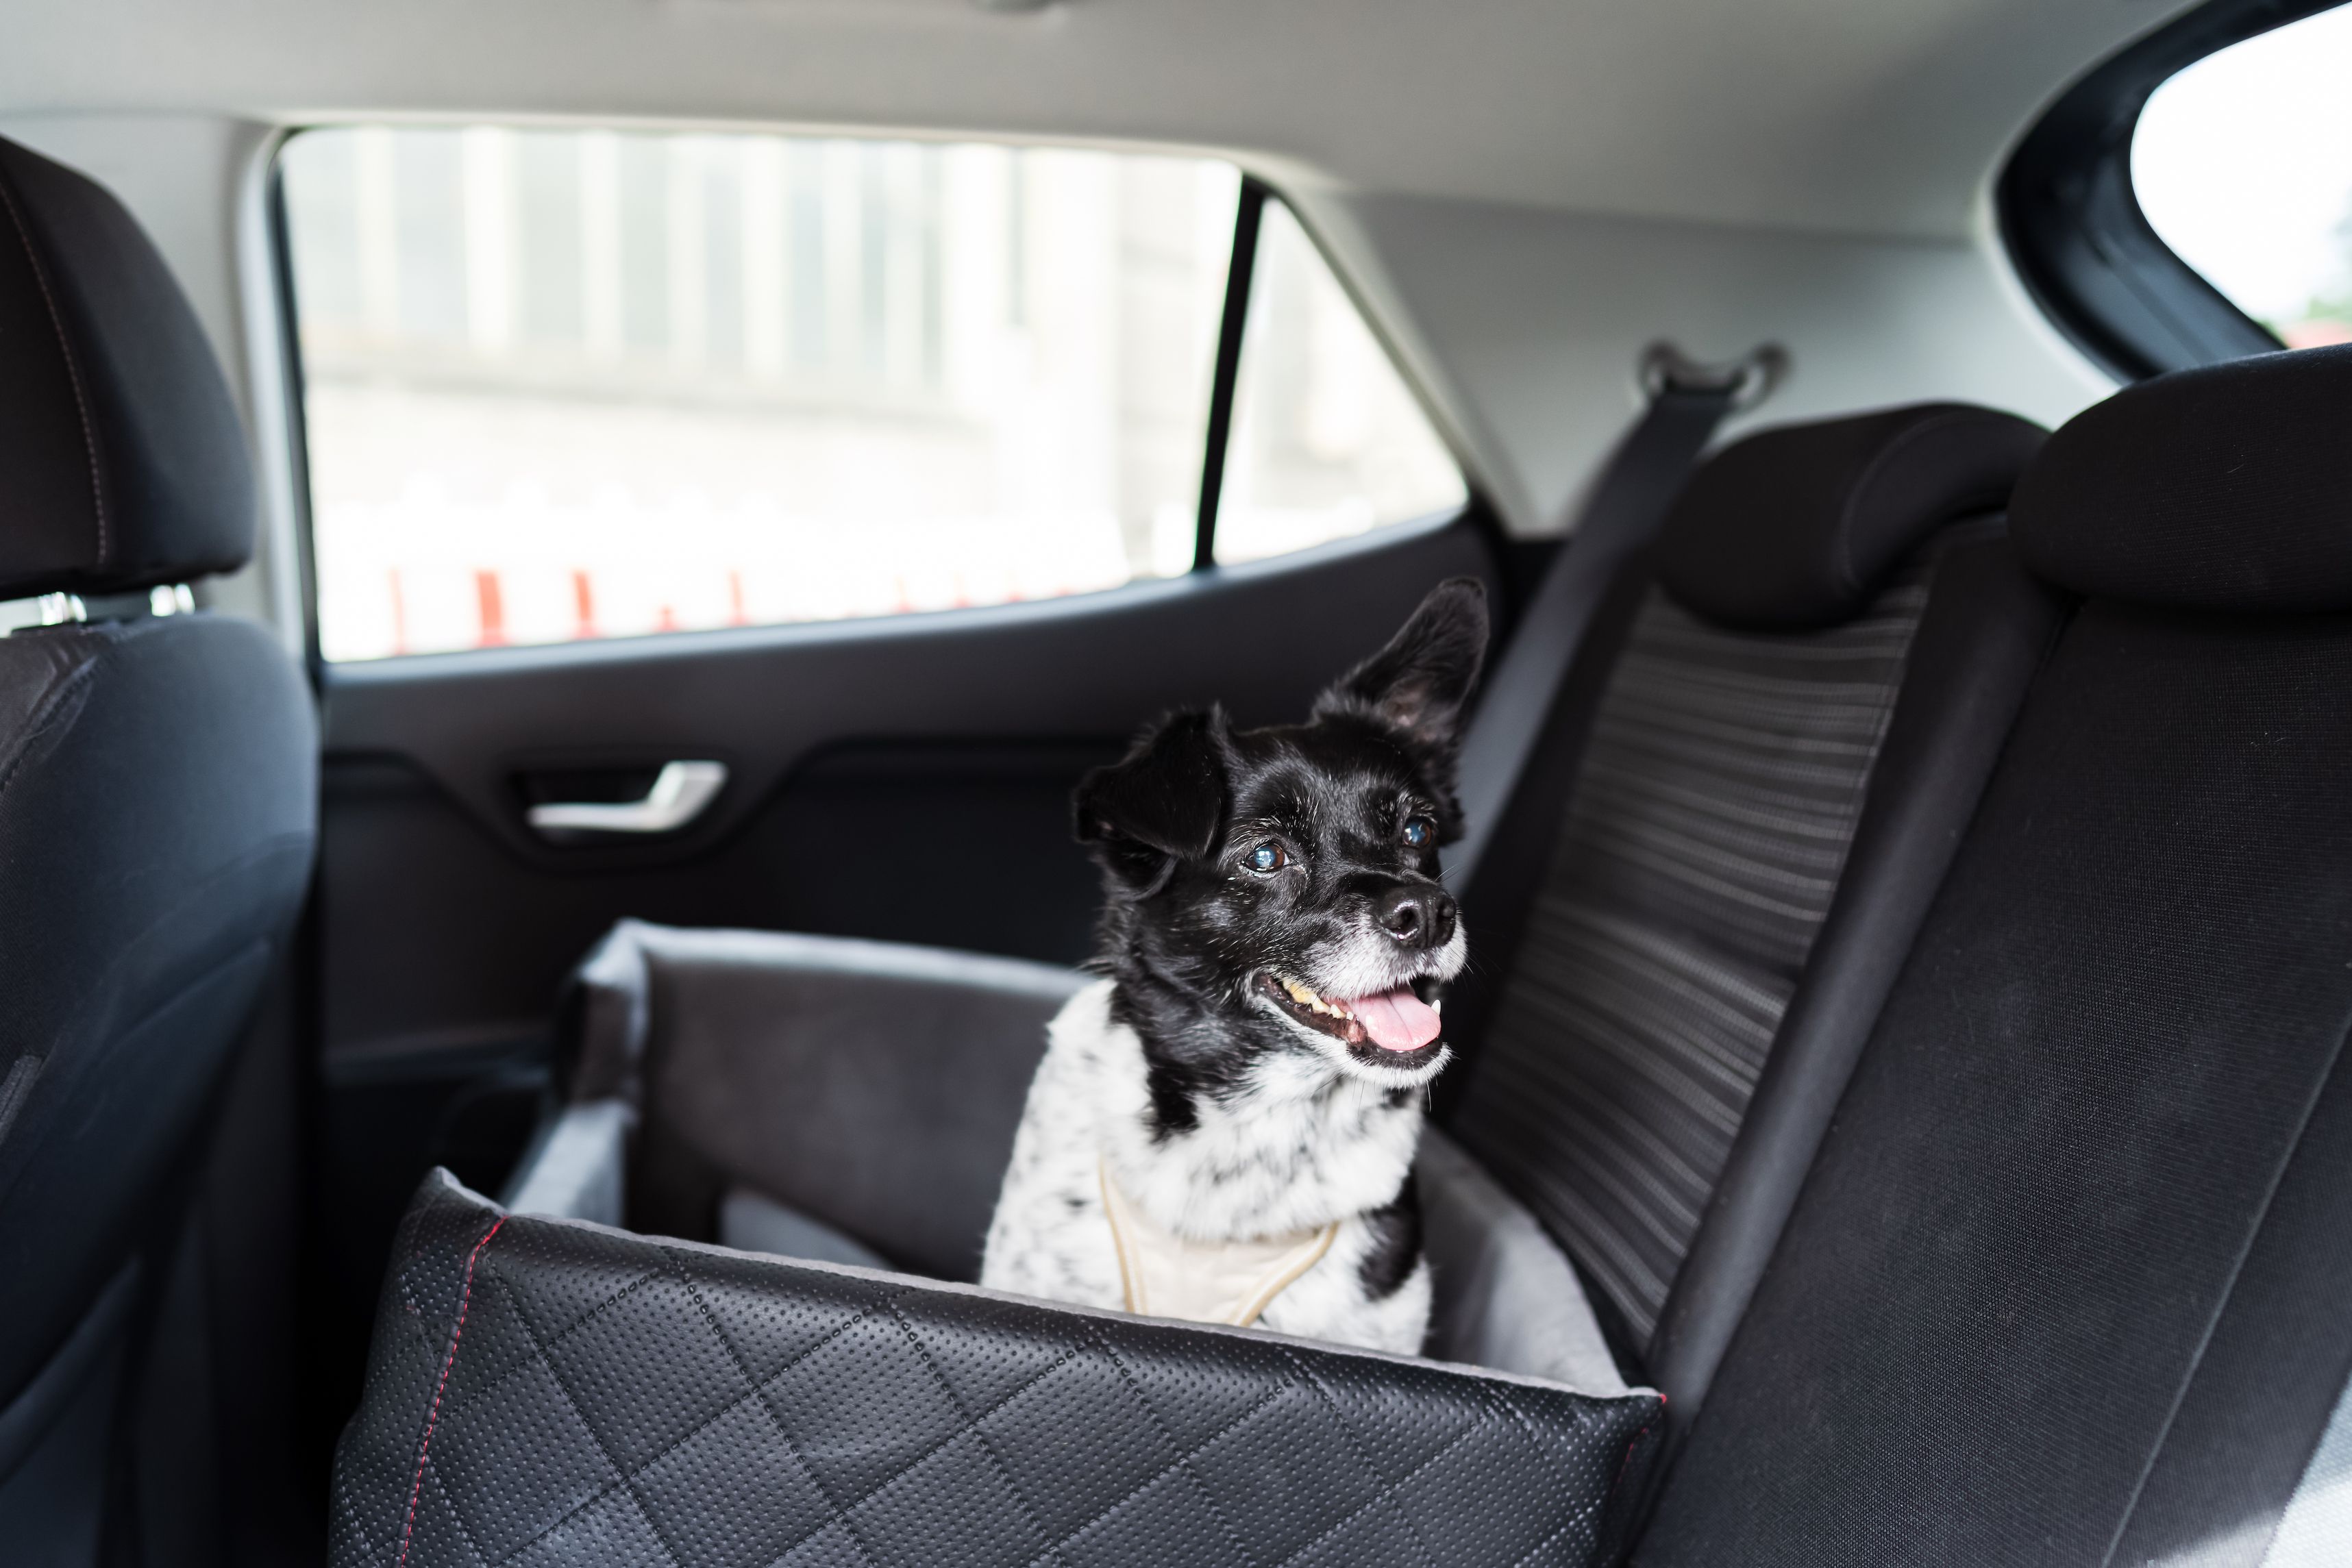 Dog Car Seats: Everything you need to know